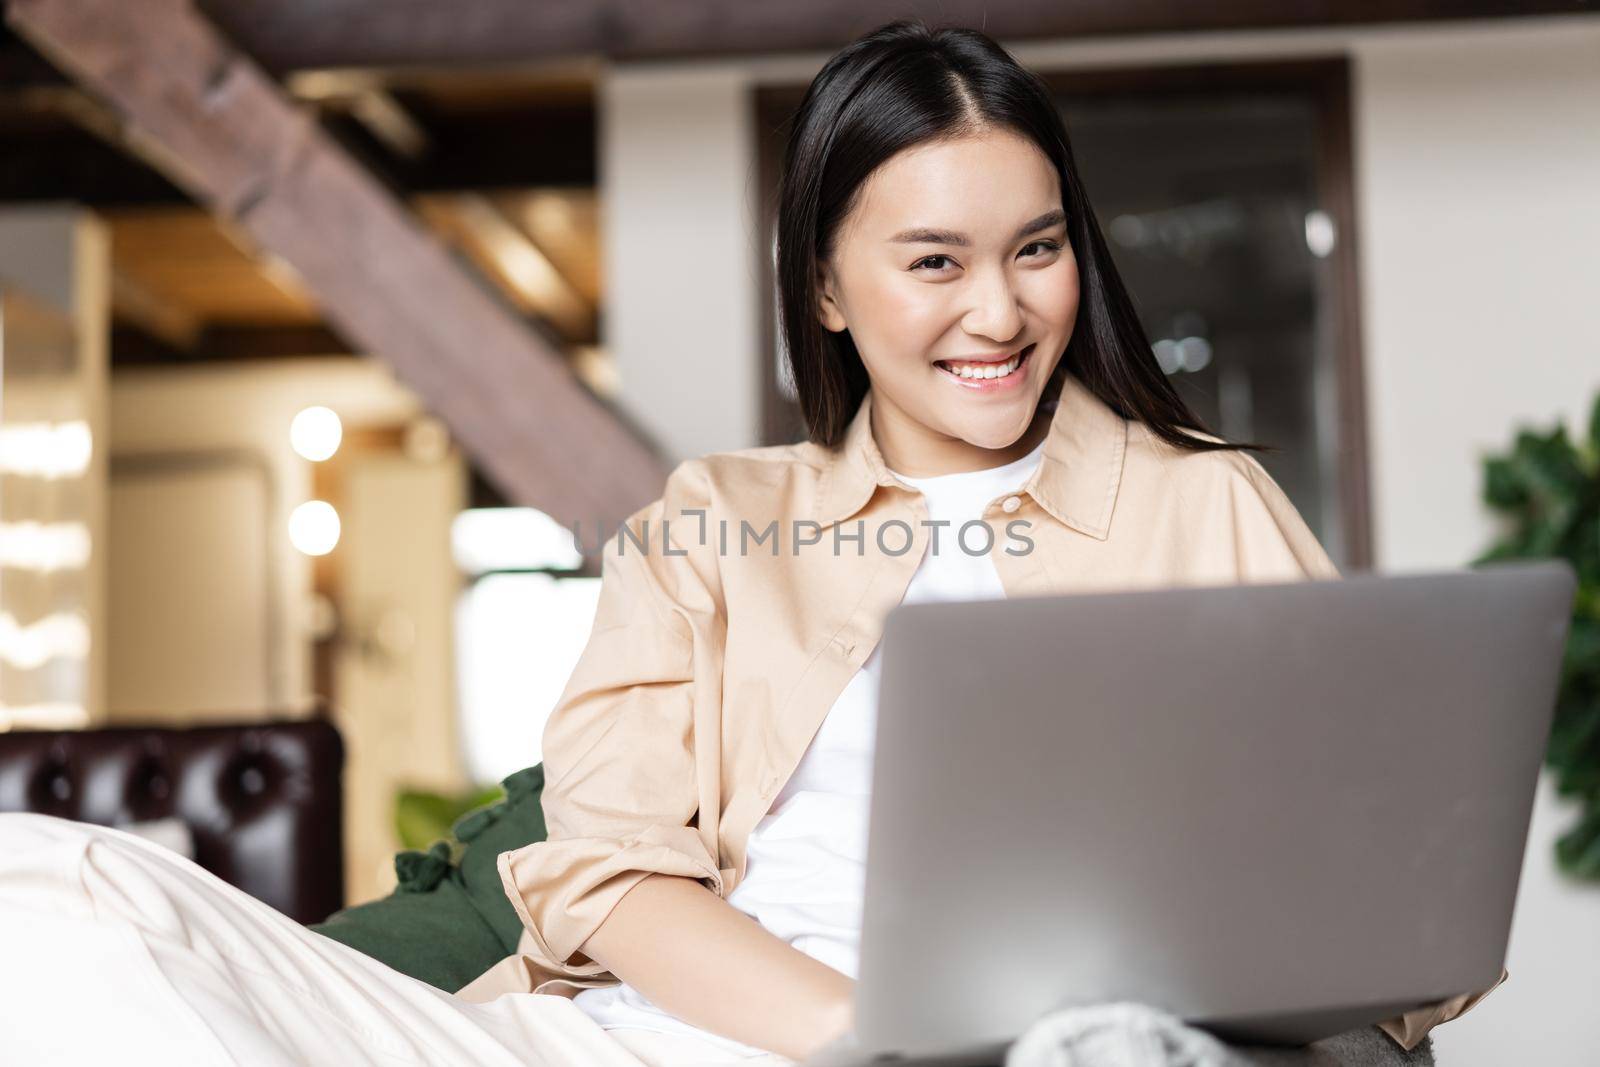 Smiling asian girl using laptop computer at home, freelancer working remote in living room, laughing at camera.